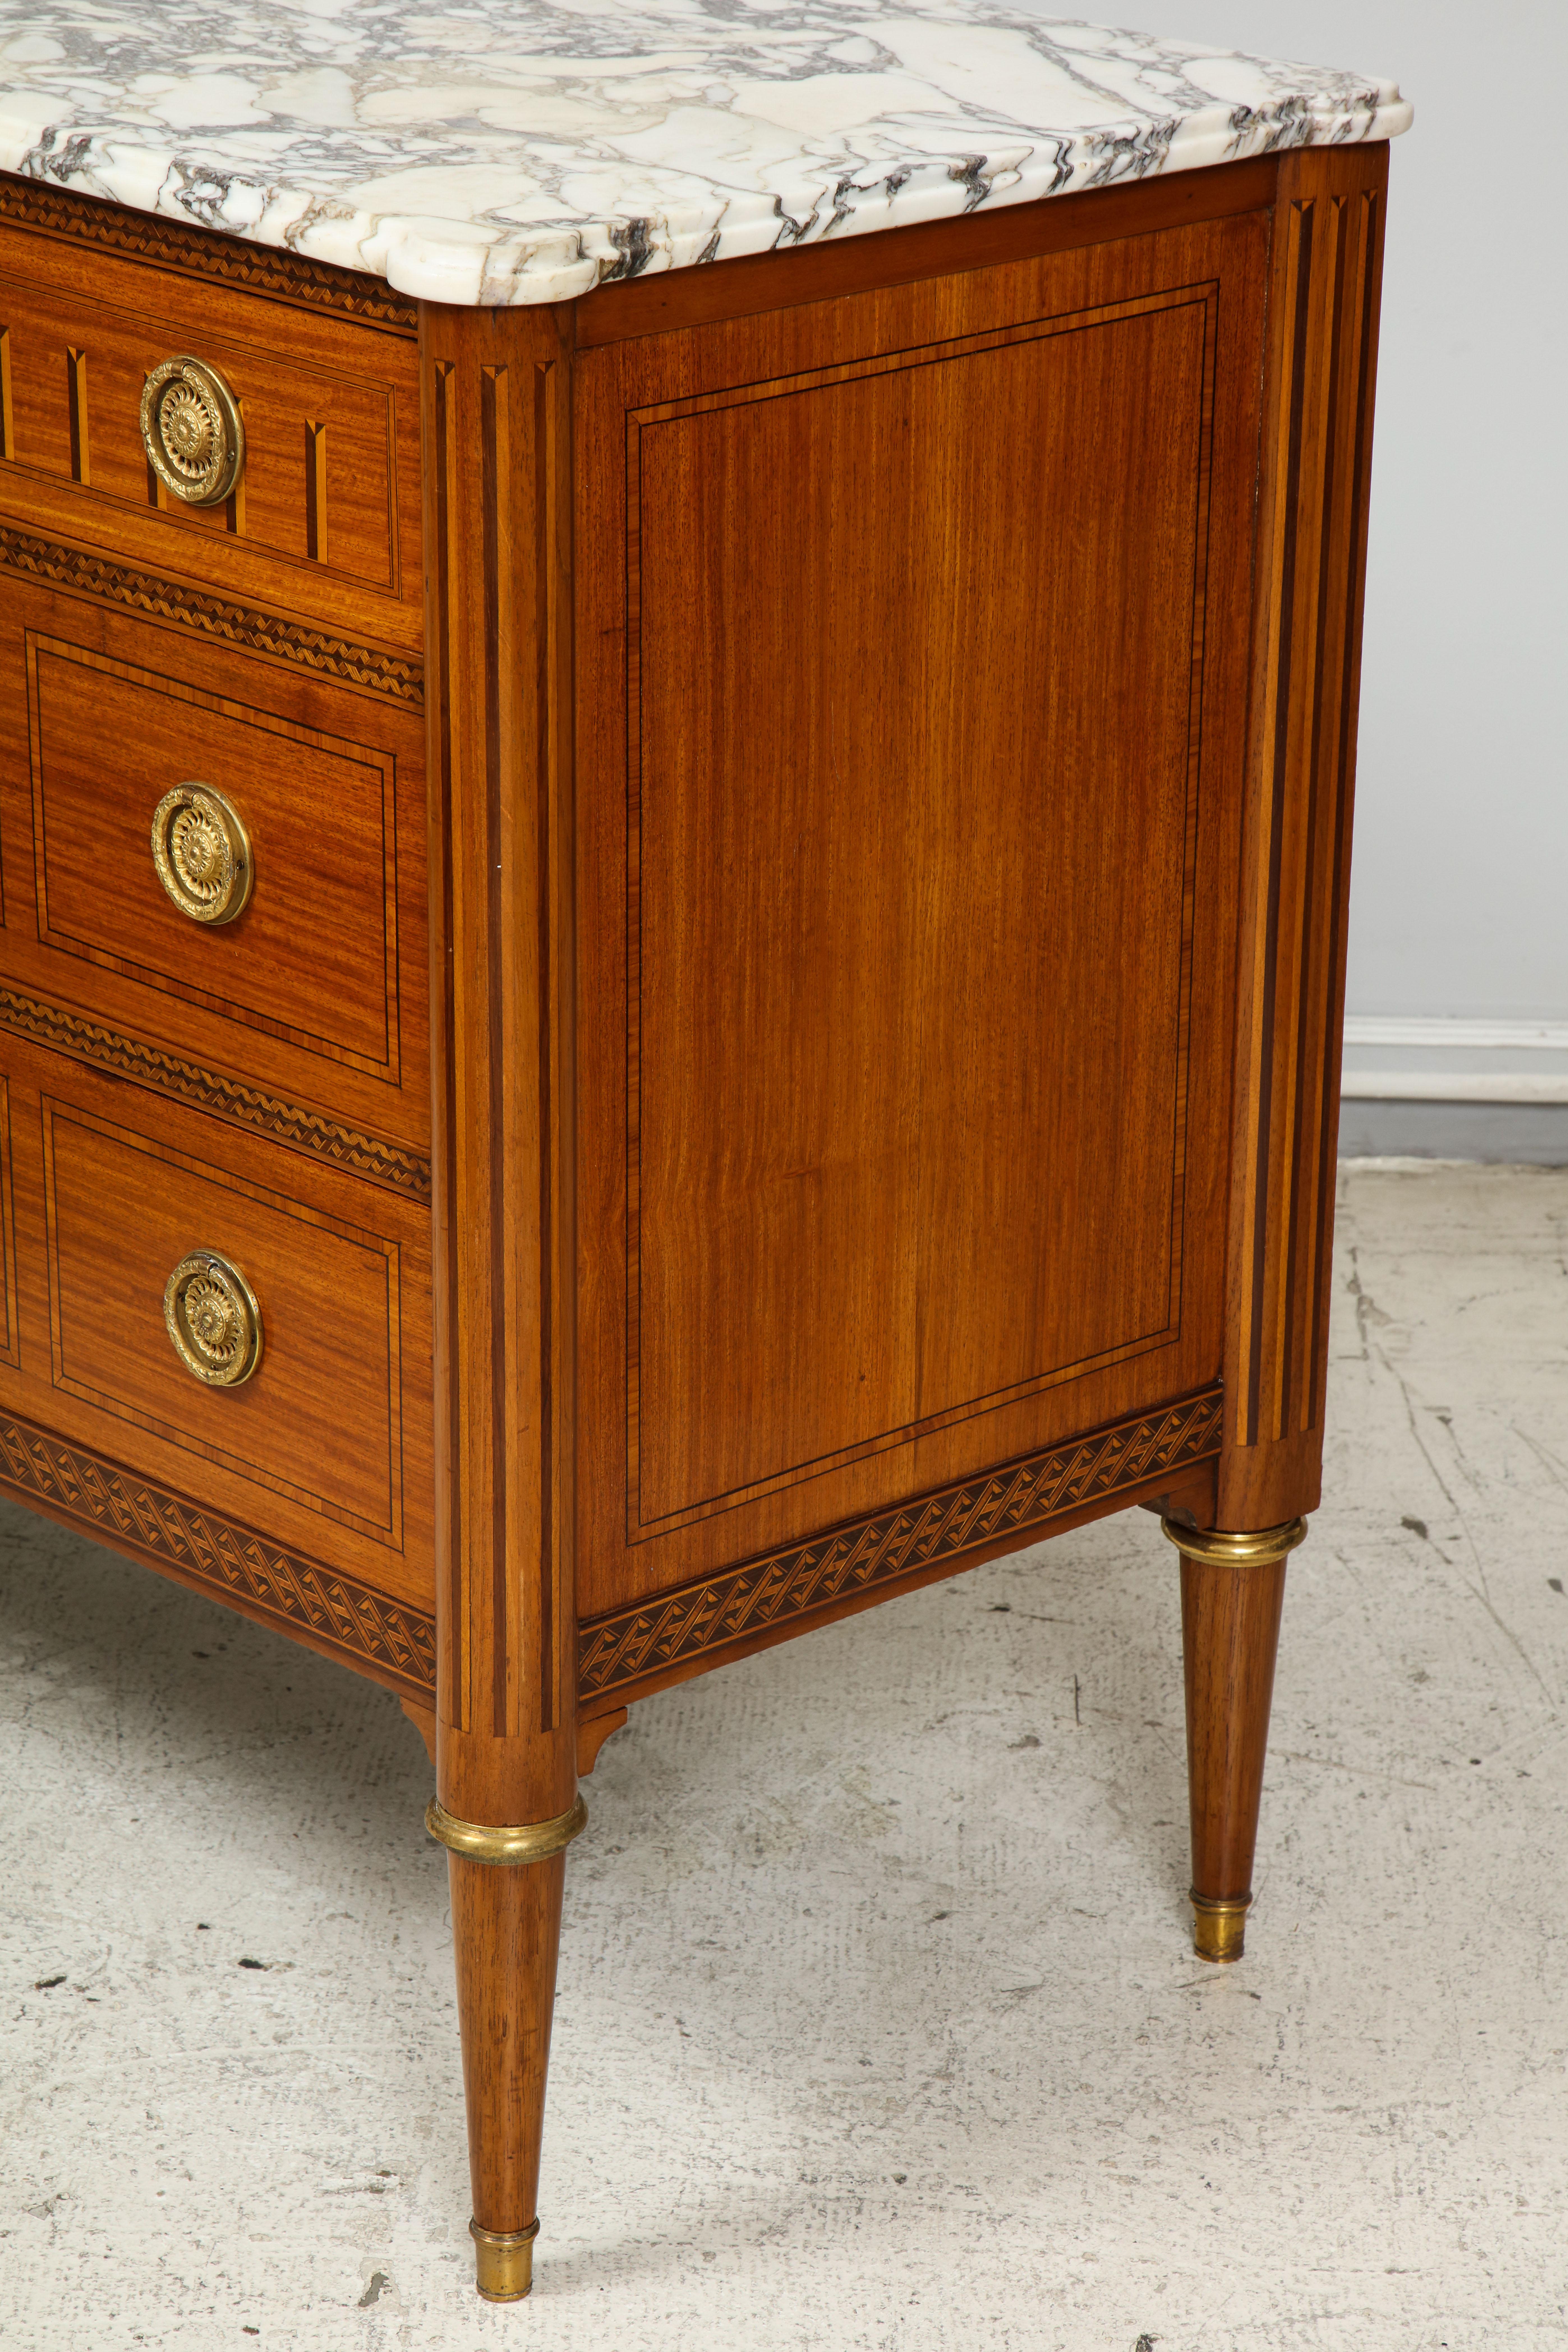 Walnut Antique Louis XVI Style Parquetry Commode with Marble Top